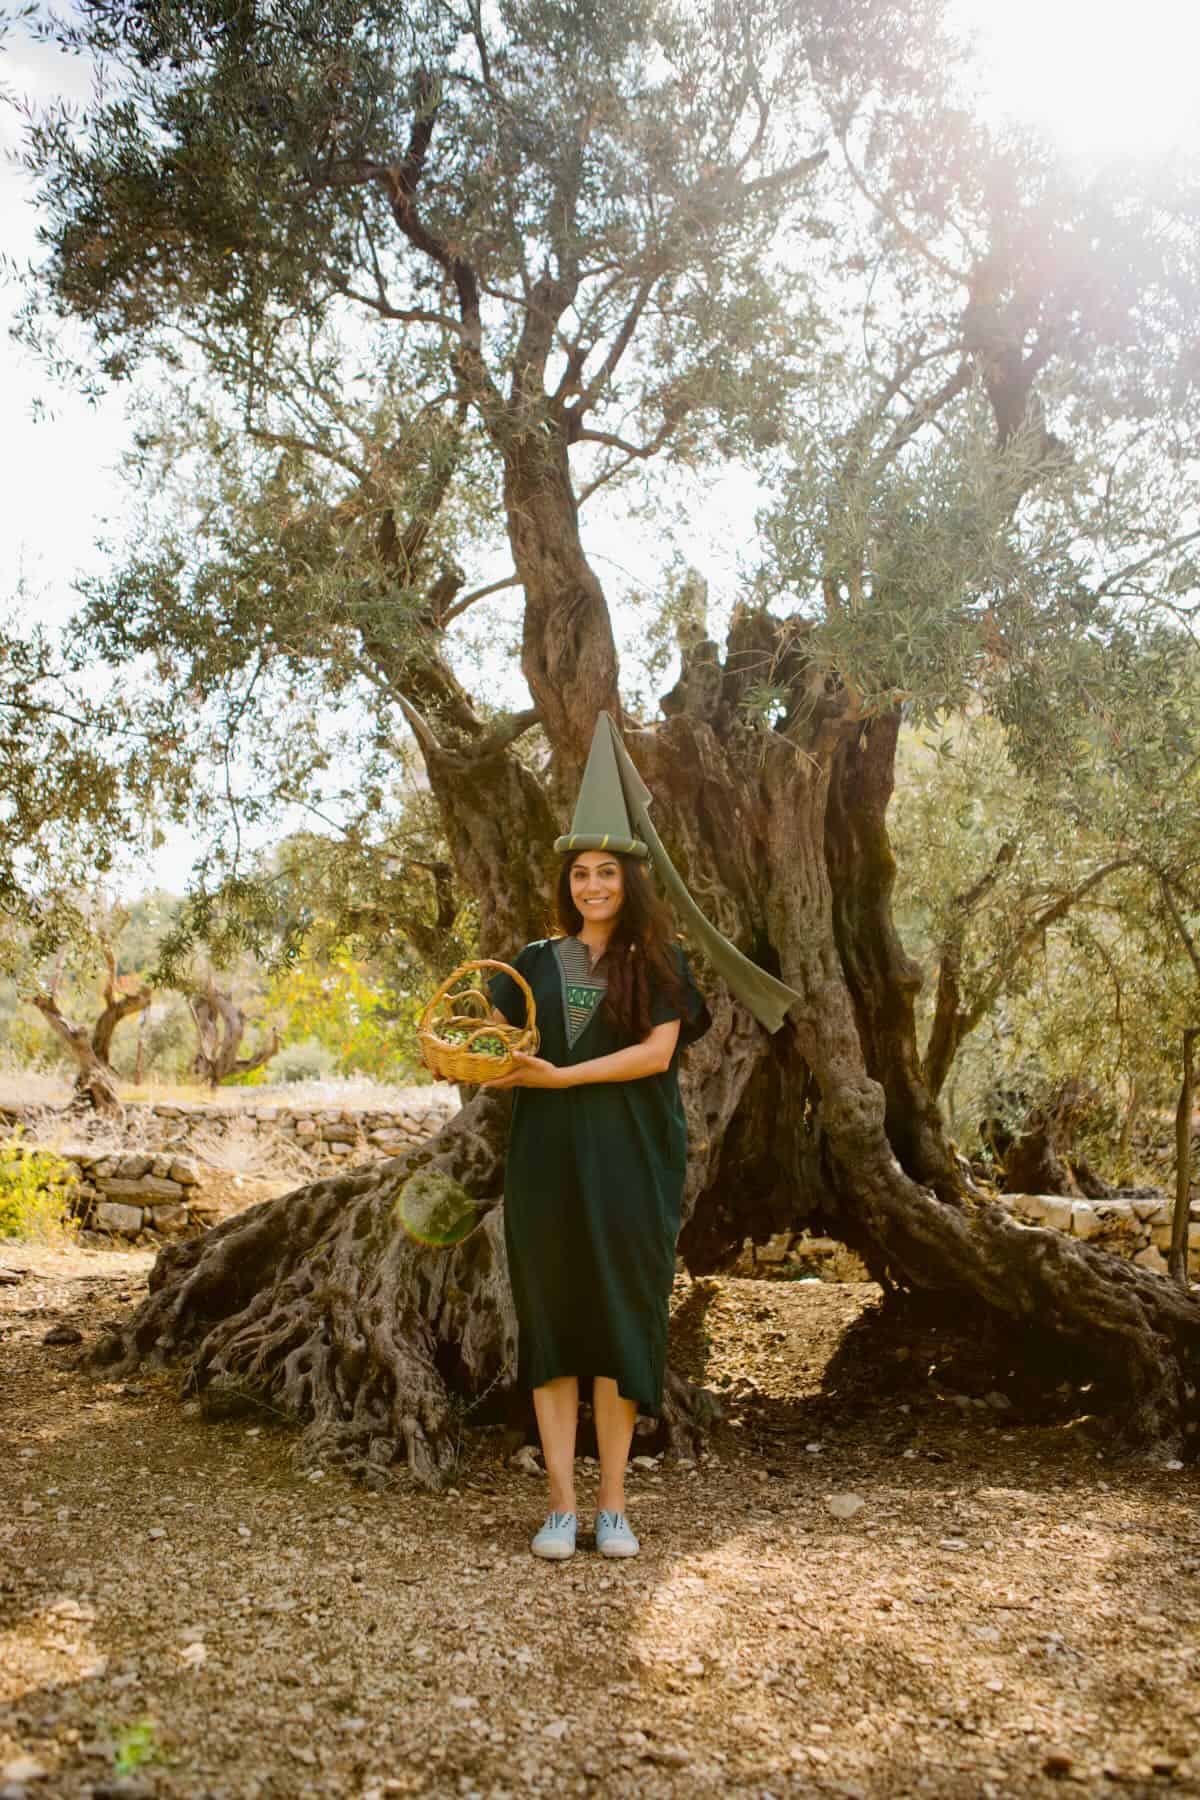 Samira in front of an olive tree